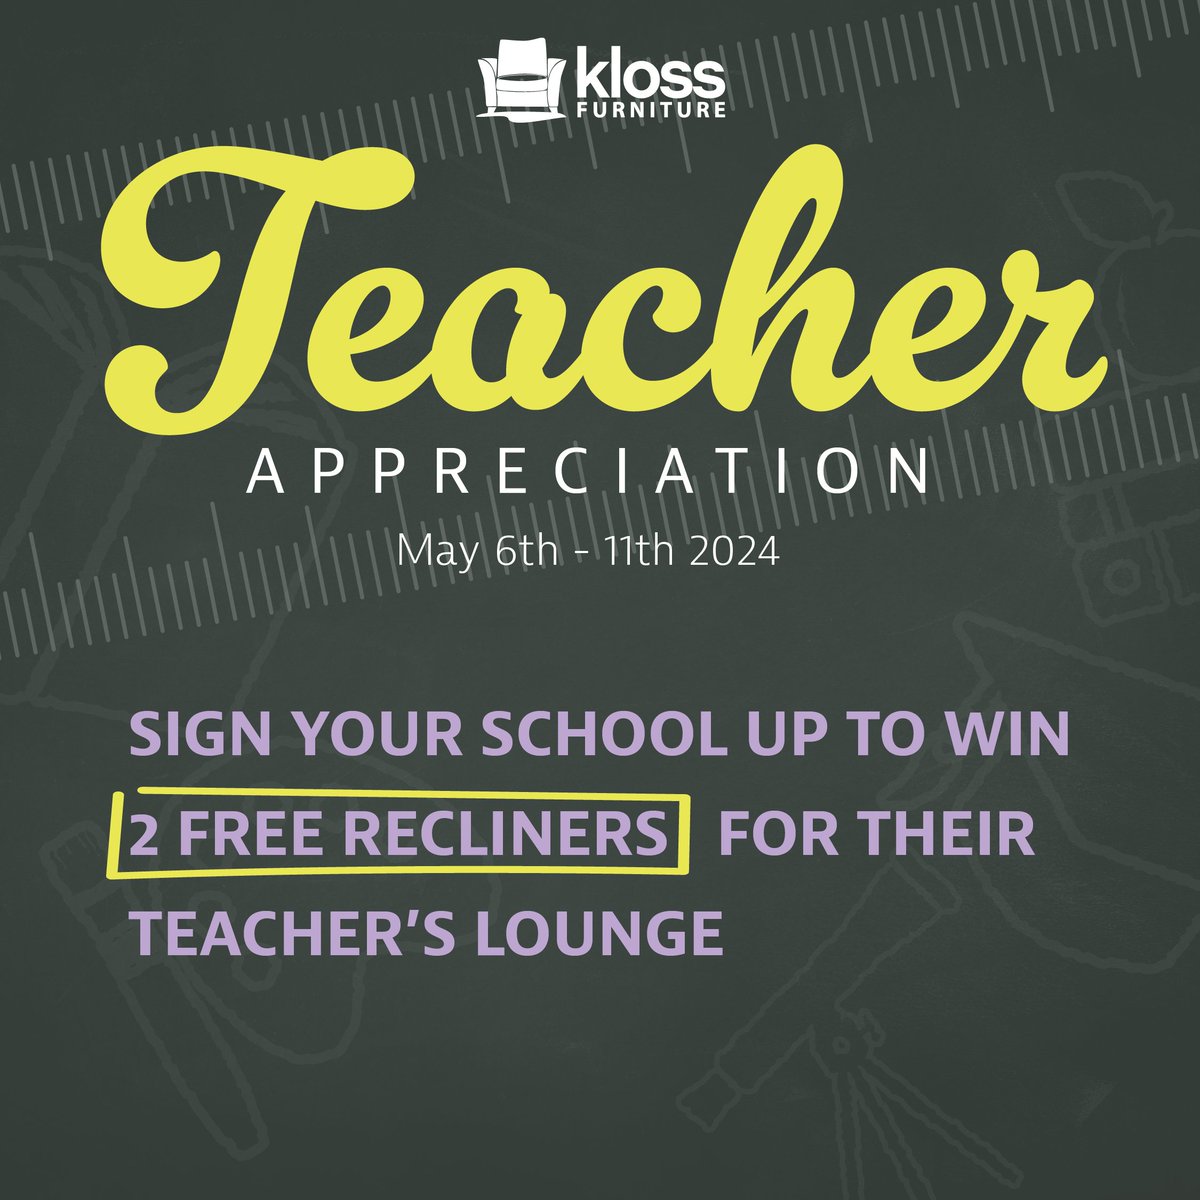 Sign your school up to win 2 FREE recliners for their Teacher's Lounge by coming into any of our 4 stores and scanning our QR code.

*restrictions apply. See store for details.

#klosstohome #localbusiness #teachersappreciation